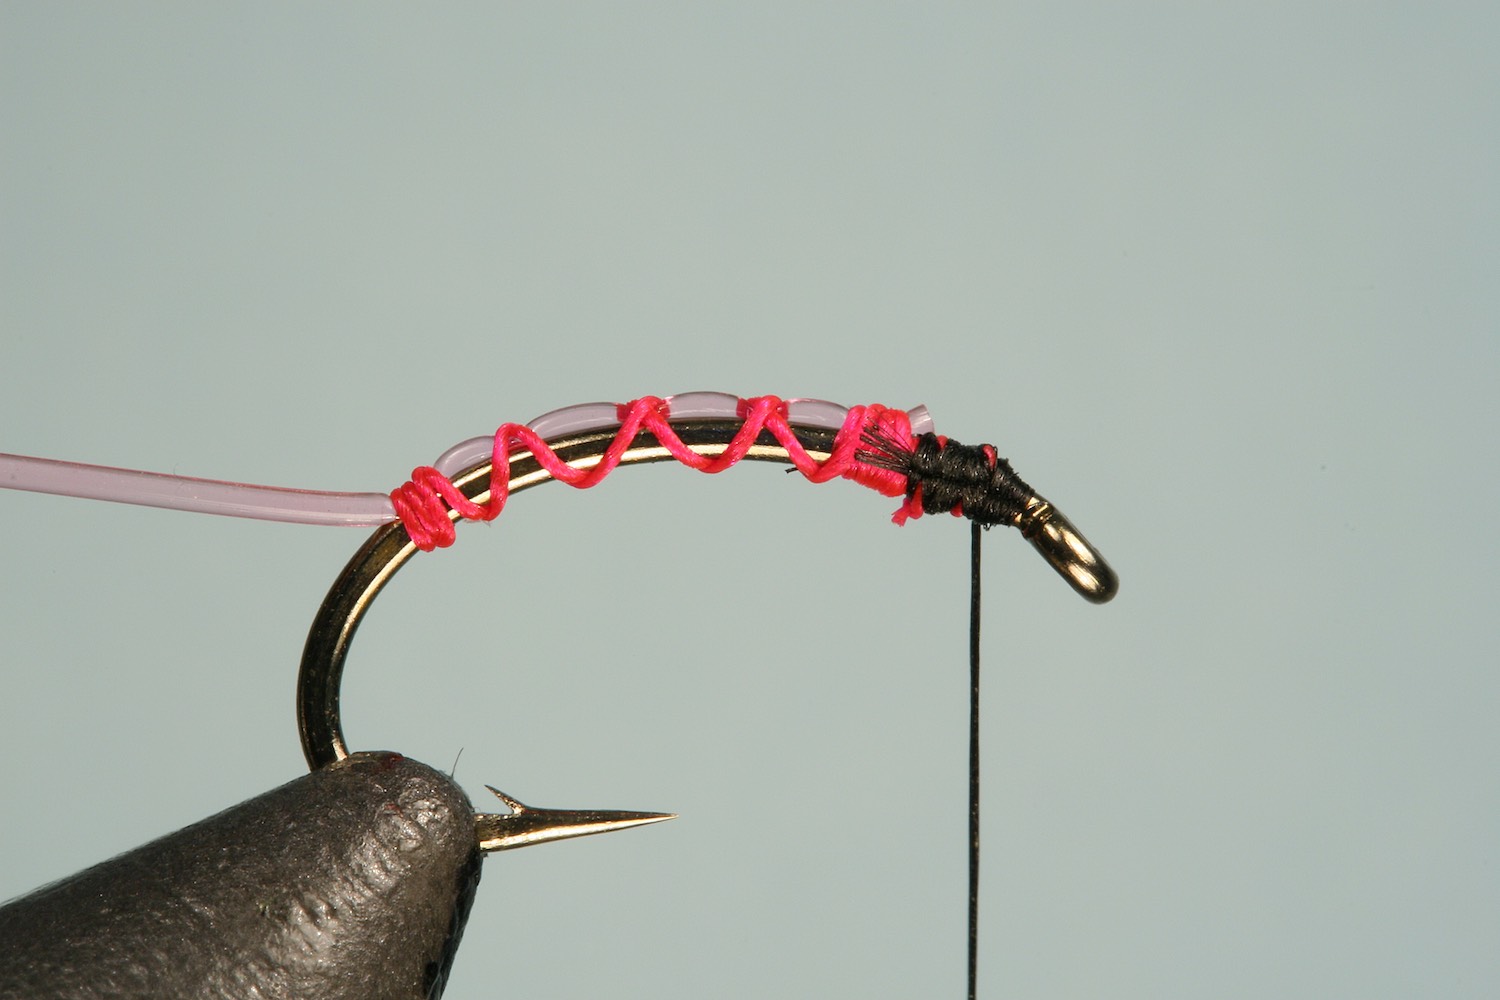 Step 1 of tying sequence for jelly caddis fly pattern